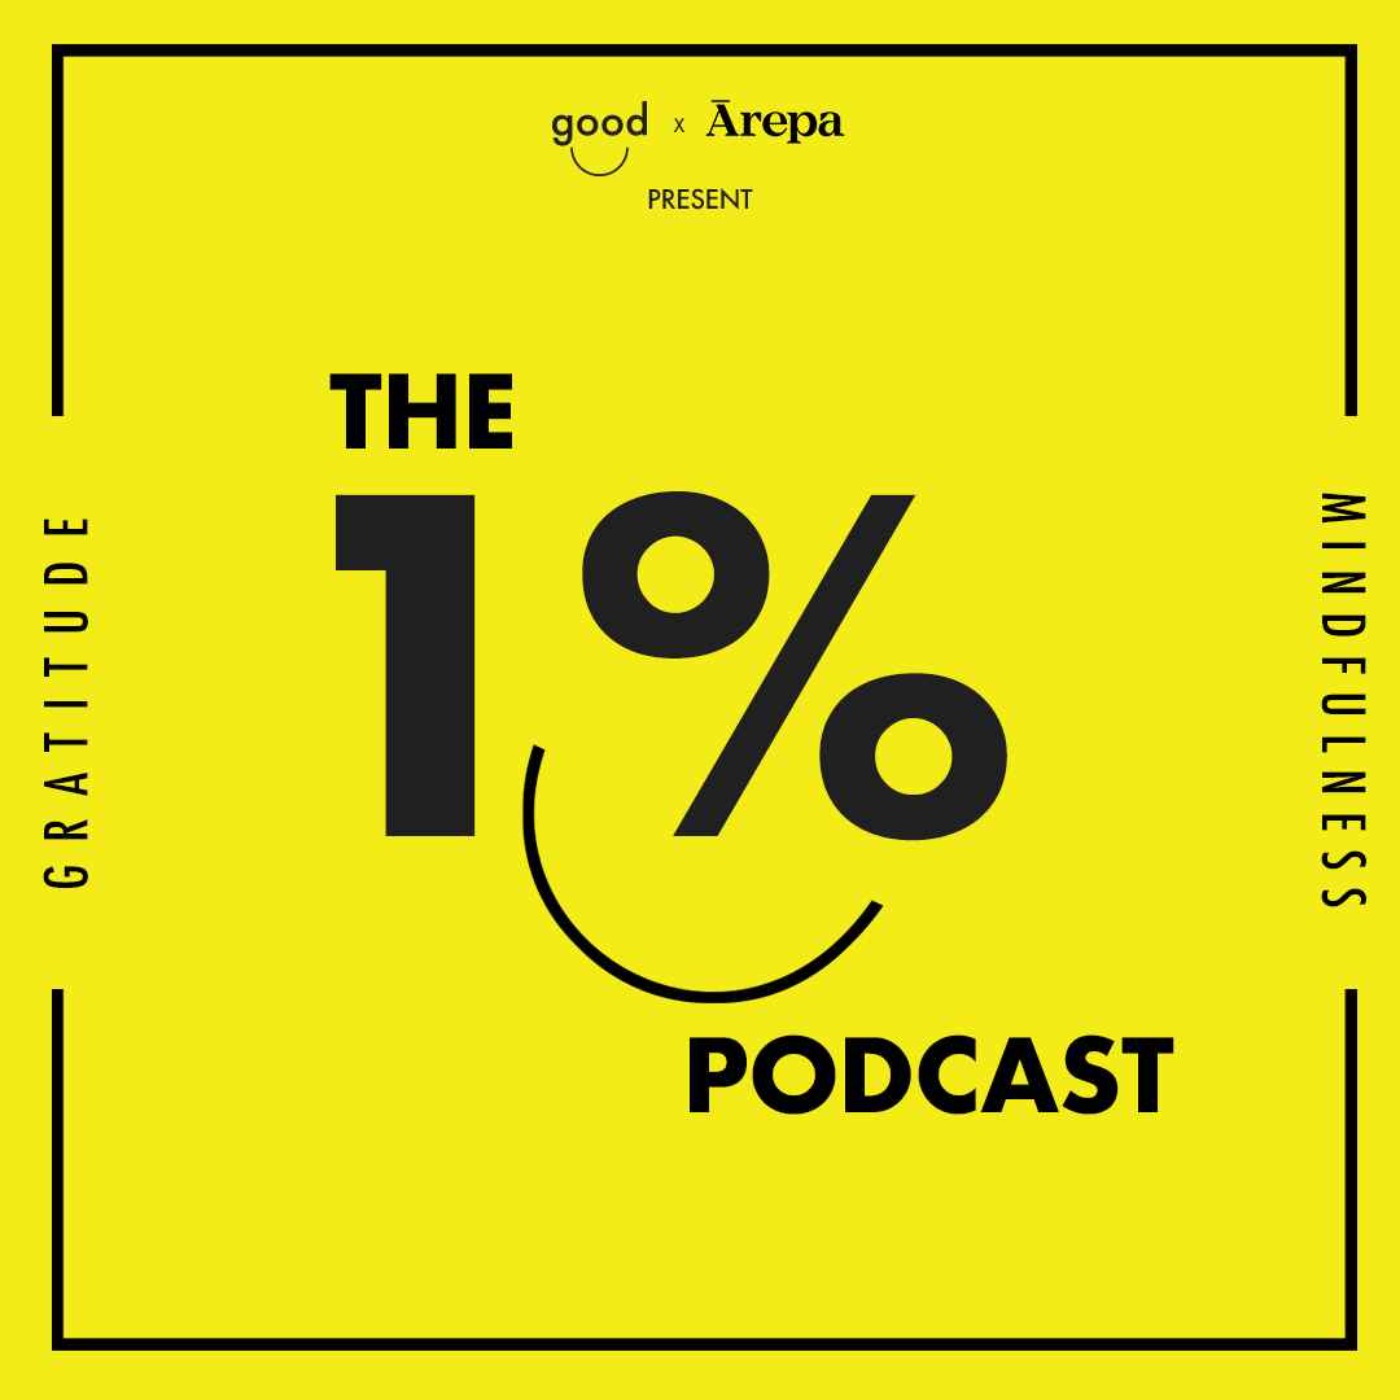 1% Pod - What makes me special